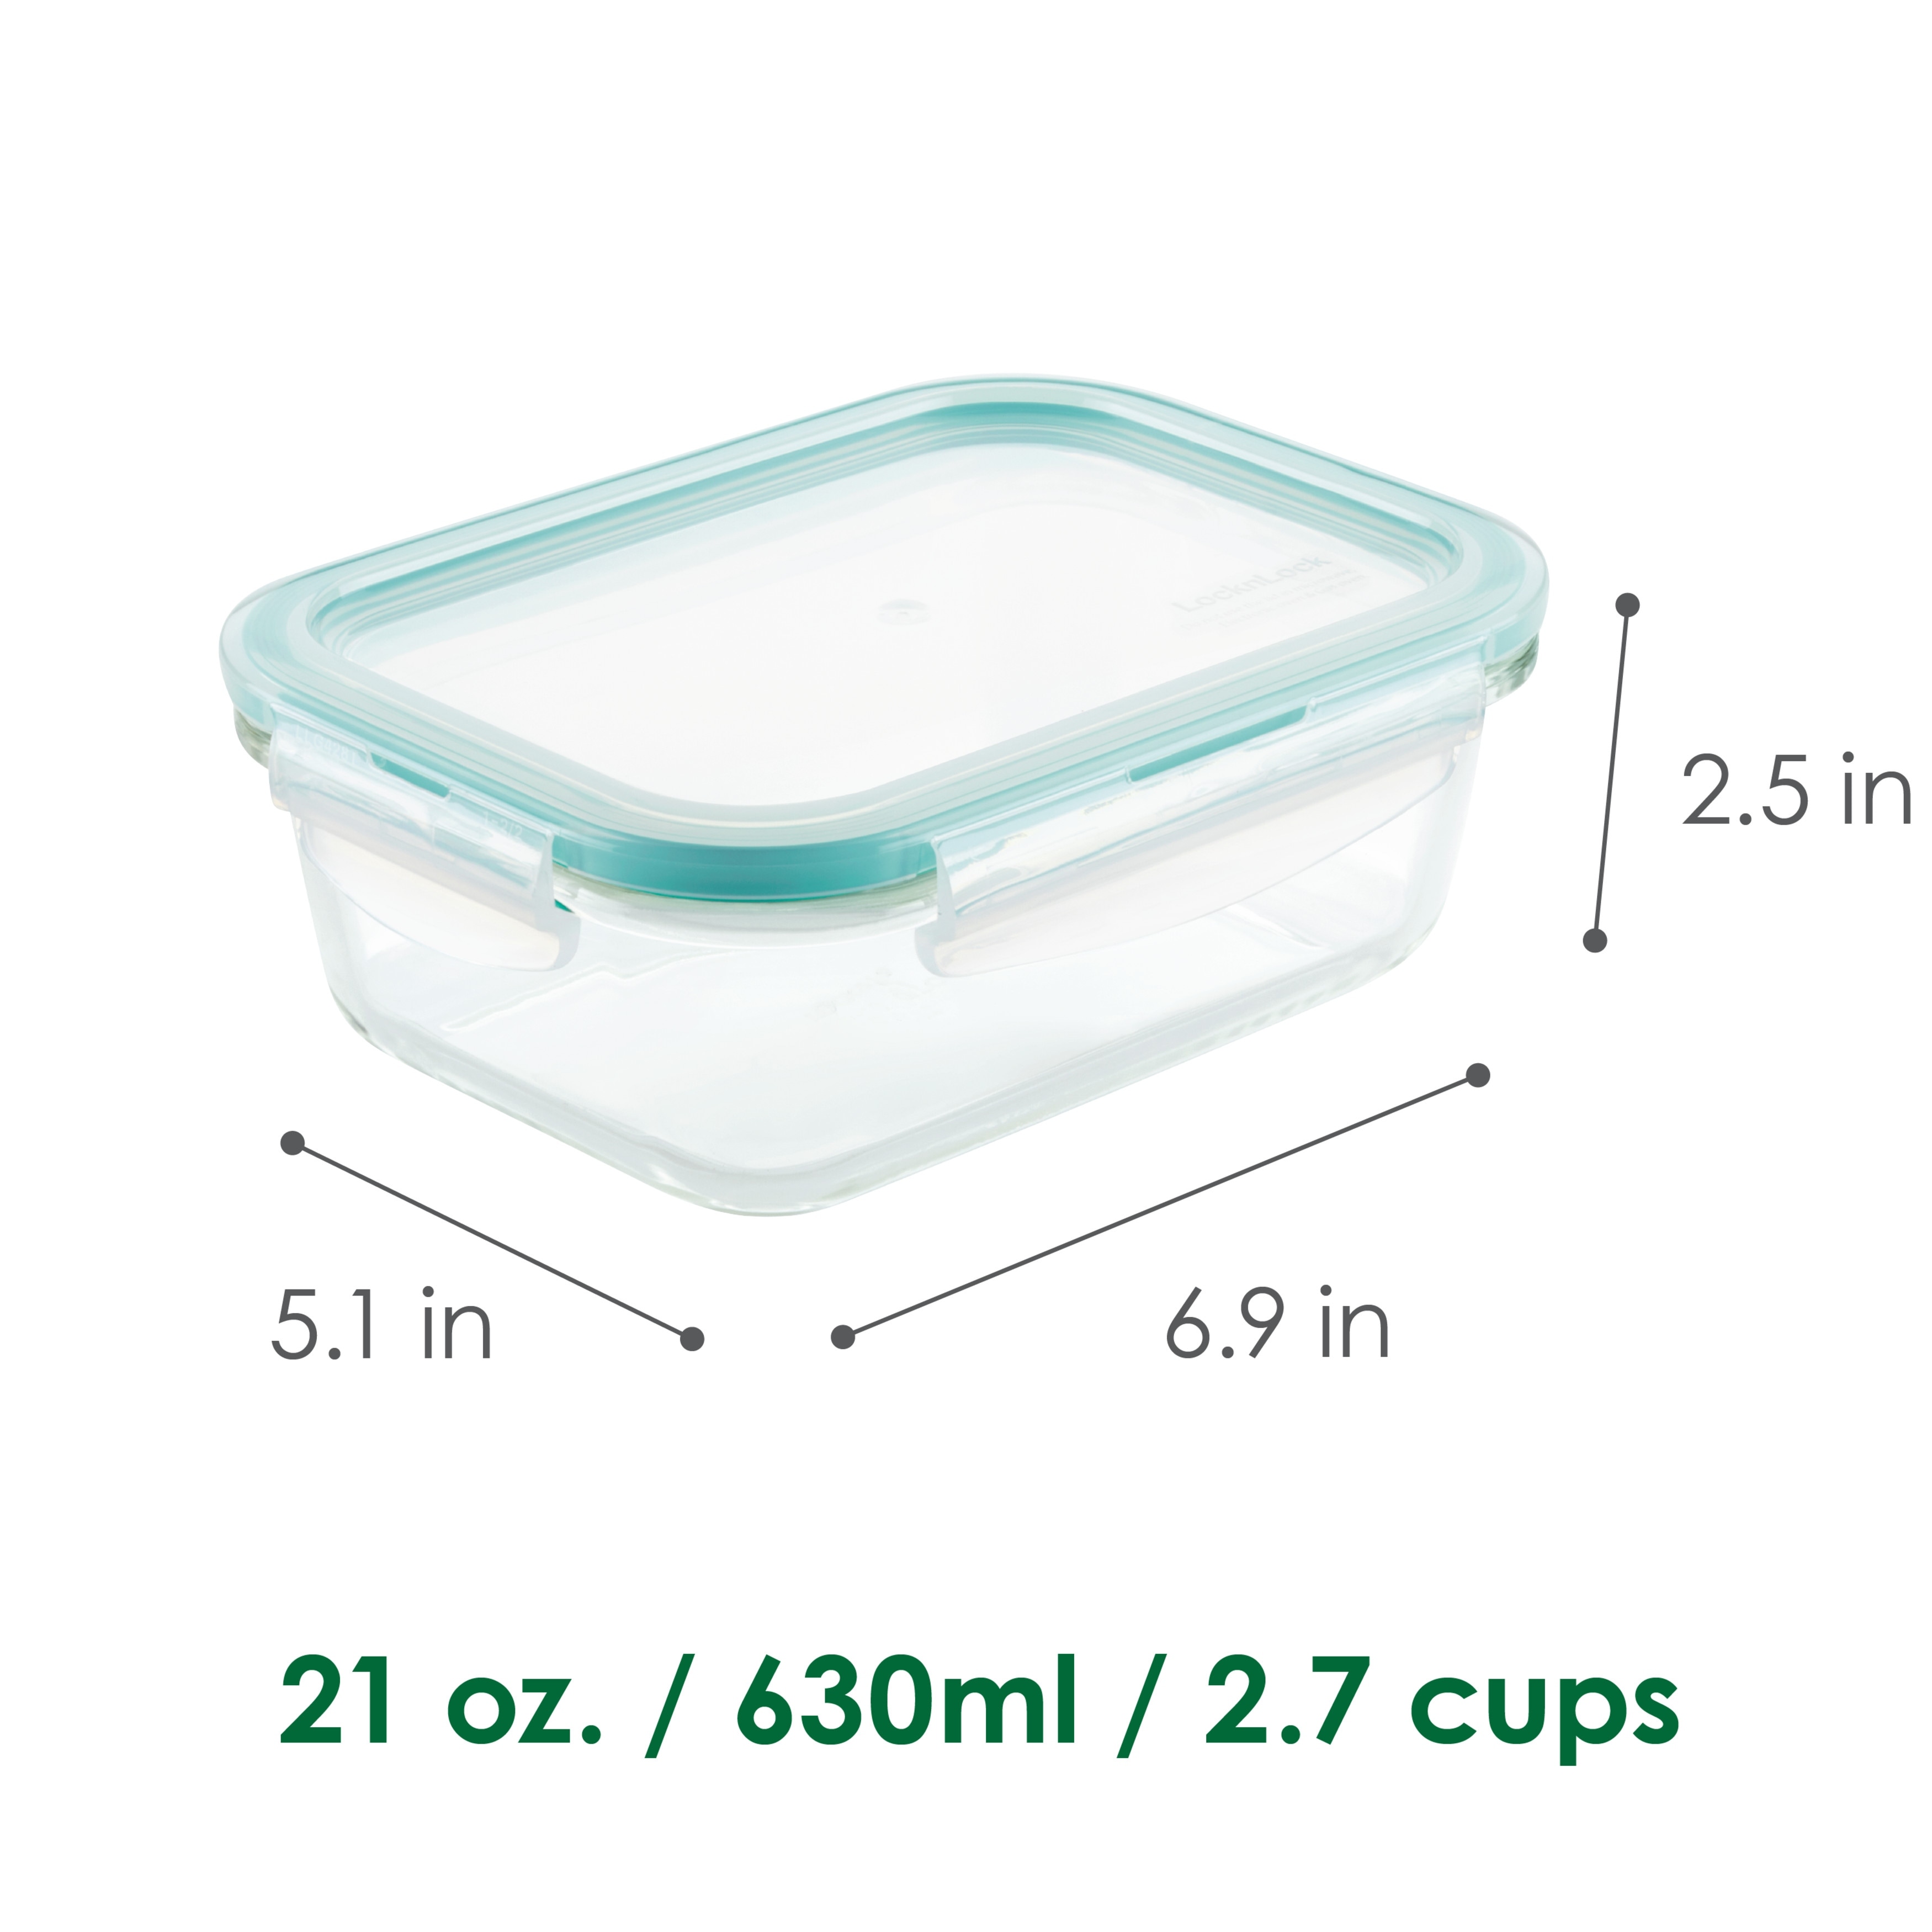 https://ak1.ostkcdn.com/images/products/is/images/direct/14fddb3cdb1e0bd53296a5518e9d50797ede1555/LocknLock-Purely-Better-Glass-Rectangular-Food-Storage-Containers%2C-21-Ounce%2C-Set-of-Four.jpg